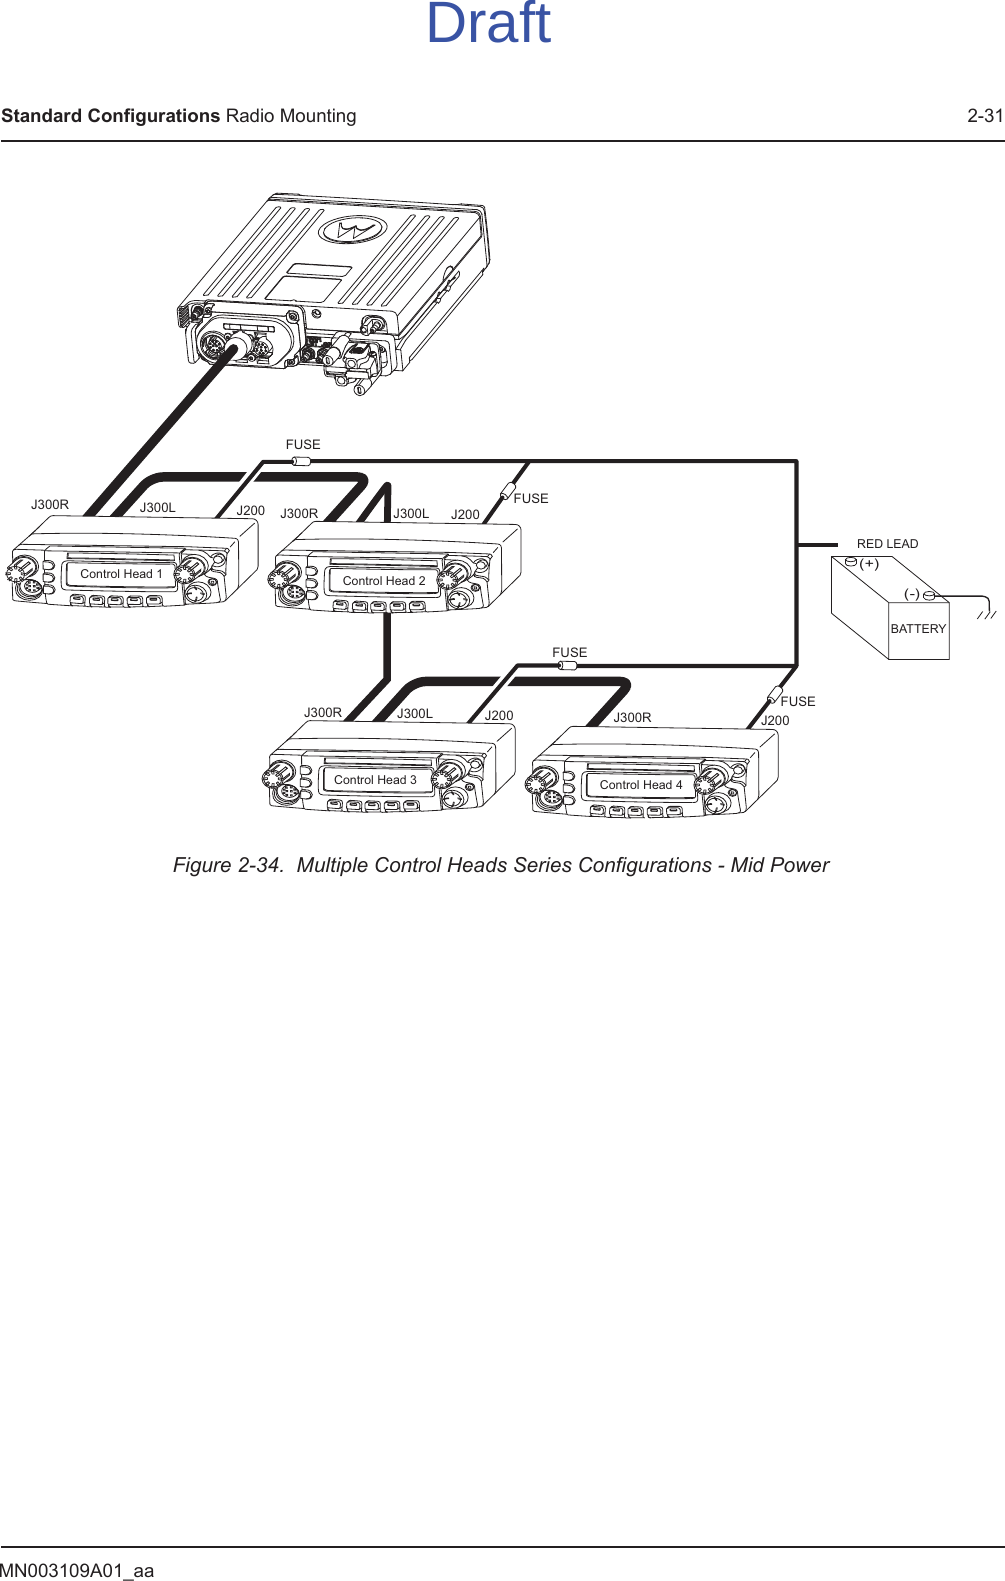 MN003109A01_aaStandard Configurations Radio Mounting 2-31Figure 2-34.  Multiple Control Heads Series Configurations - Mid PowerControl Head 1 Control Head 2J300R J300RJ200 J200J300L J300L(-)RED LEAD(+)BATTERYFUSEFUSEFUSEFUSEControl Head 3 Control Head 4J300RJ200 J200J300LJ300RDraft